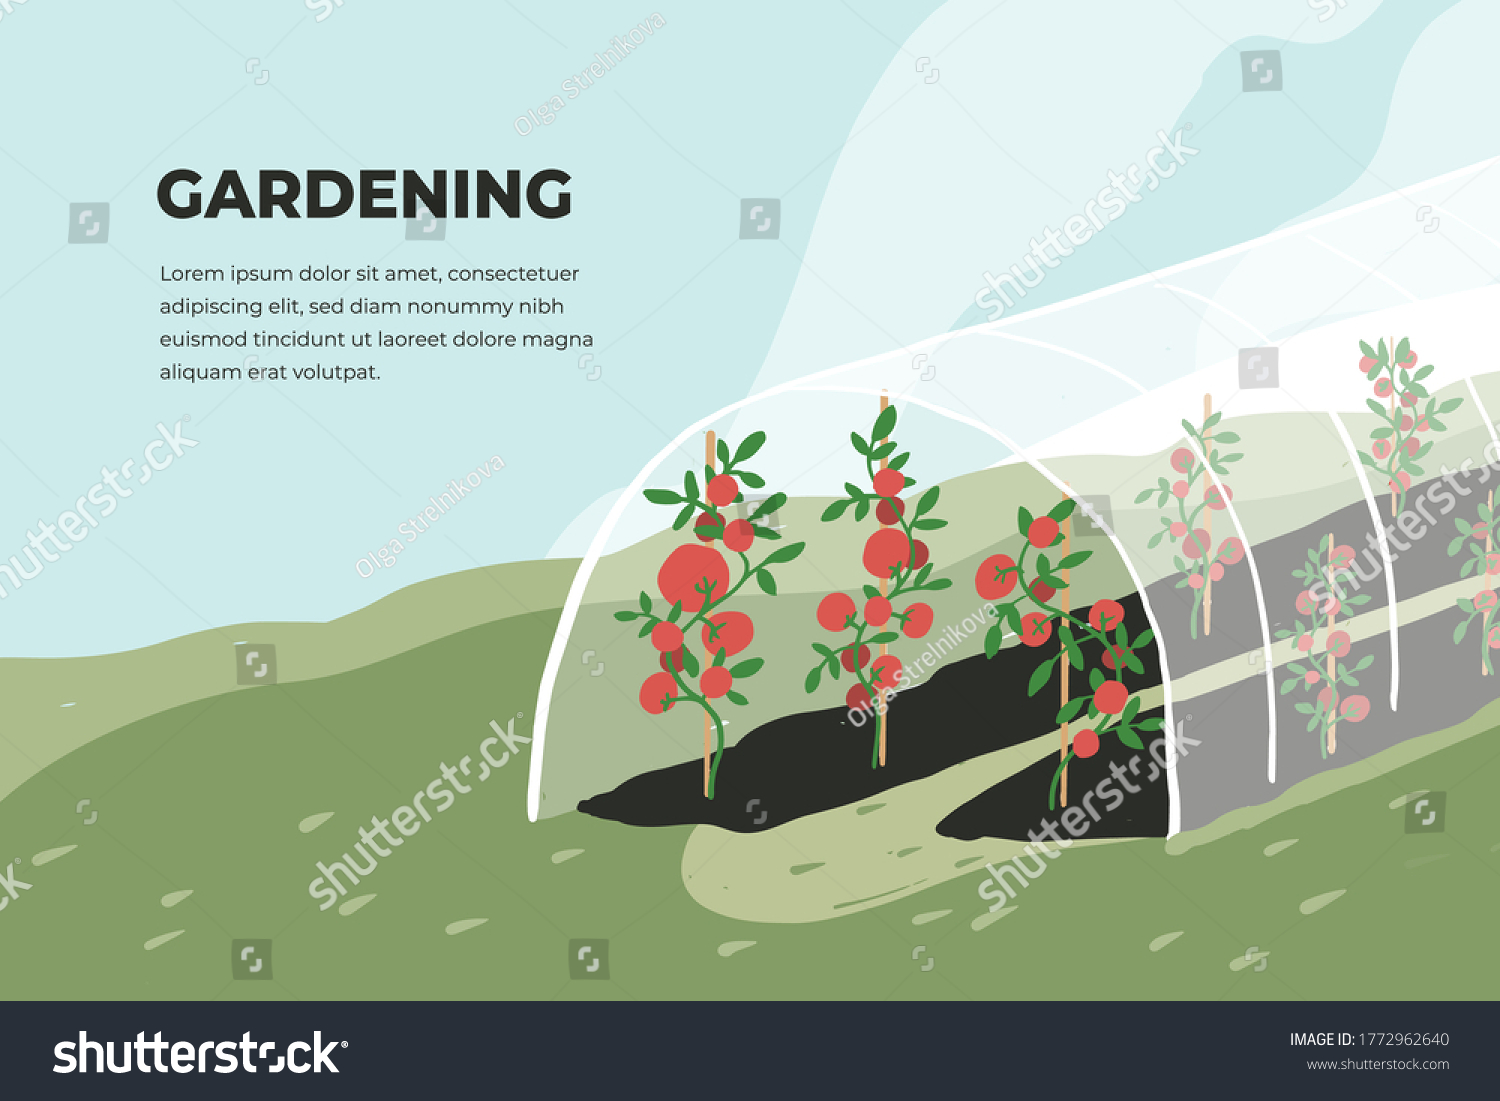 SVG of Design template of gardening. Greenhouse with tomato plants. Spring or summer time in garden. Growing vegetables in agriculture. Farming landscape, cultivated land vector illustration. Banner or flyer svg